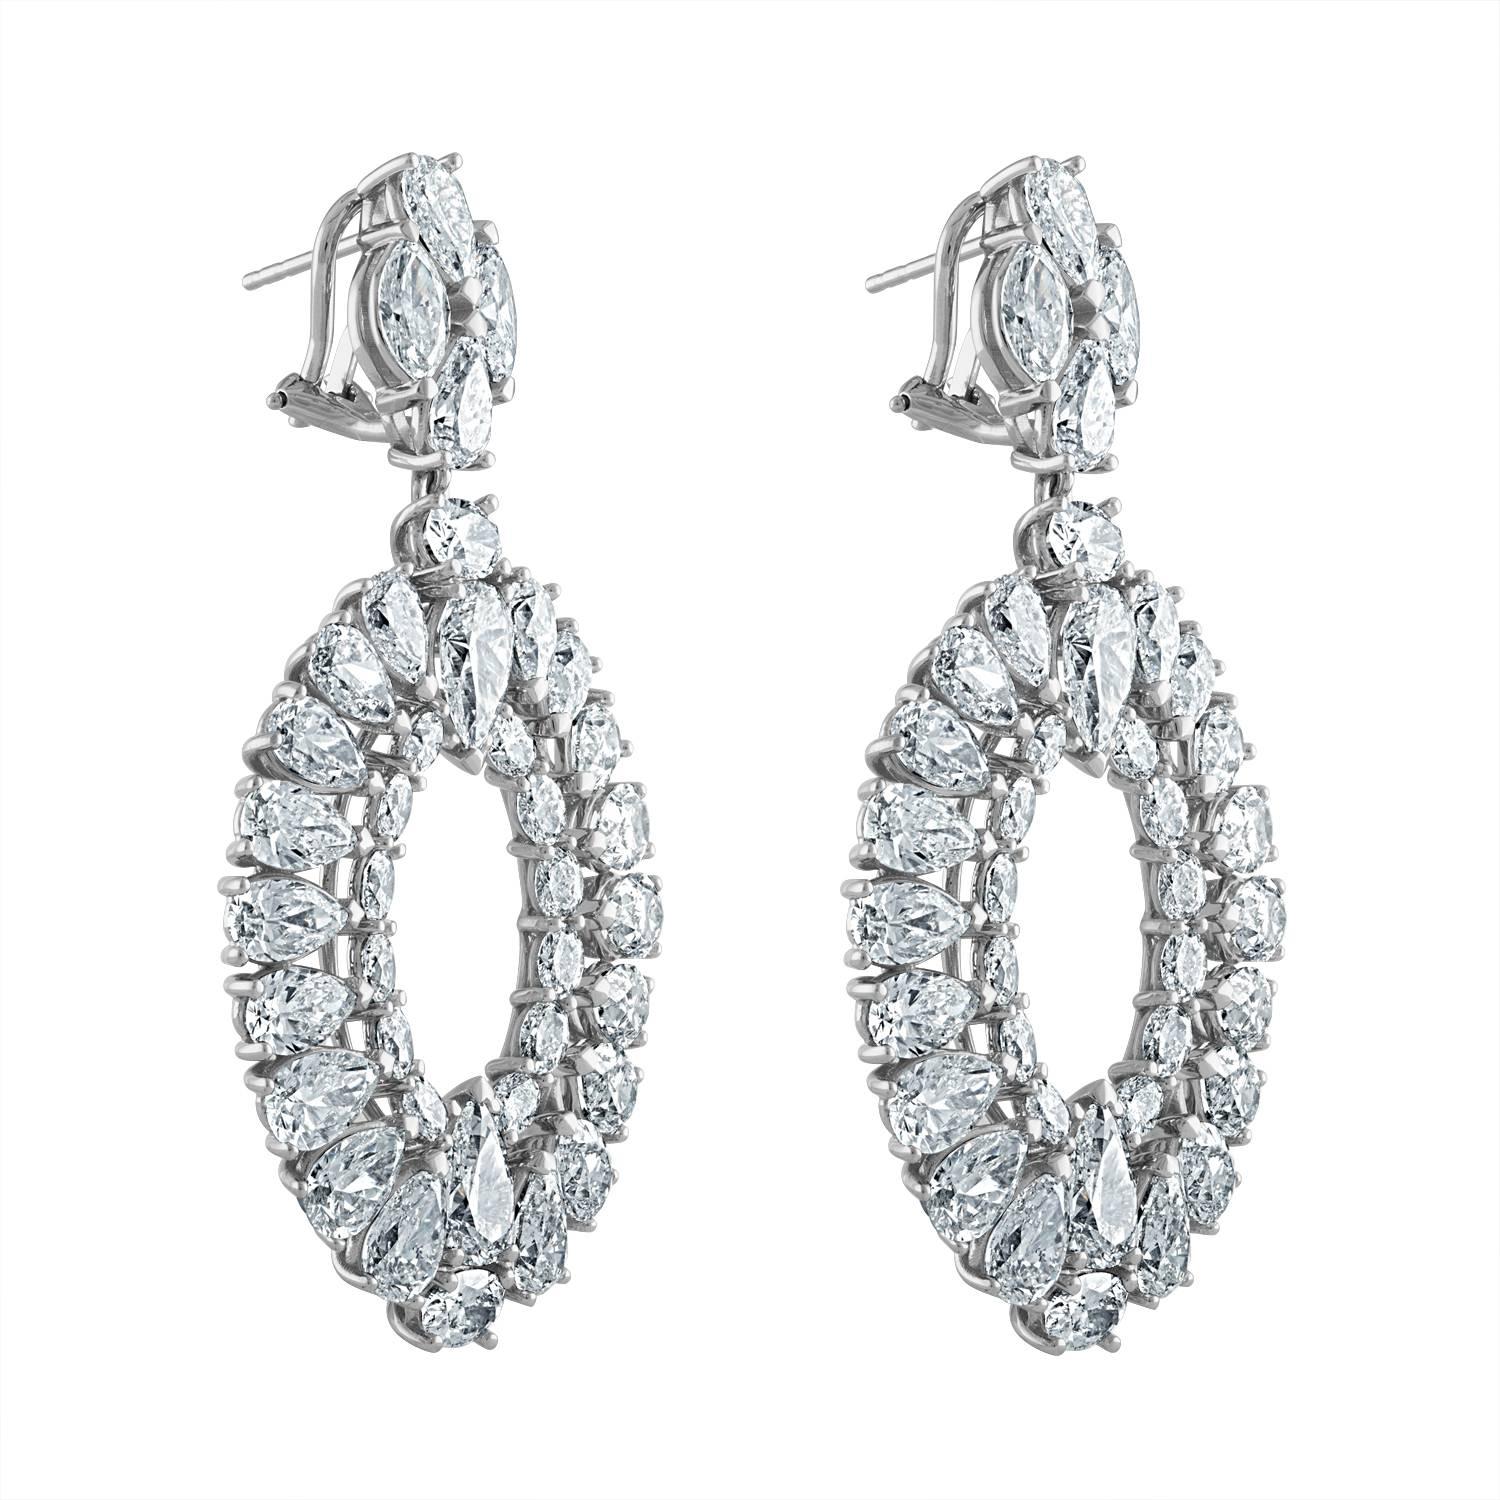 Pear Shape, Marquis and Oval Shape Diamonds are set in Platinum Earrings. The Earring is approximately 2.5 